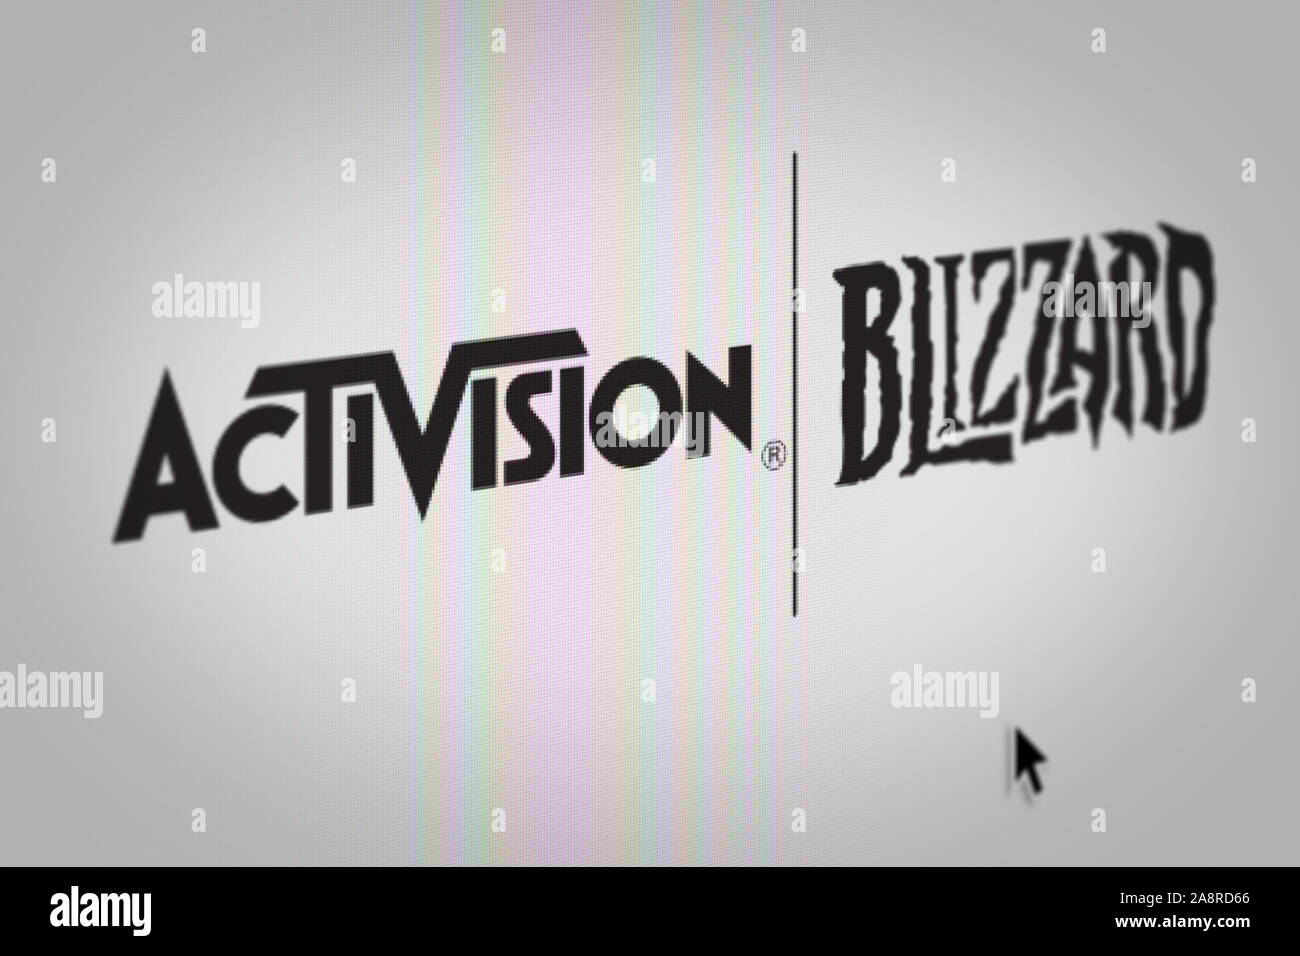 Logo of the public company Activision Blizzard displayed on a computer screen in close-up. Credit: PIXDUCE Stock Photo